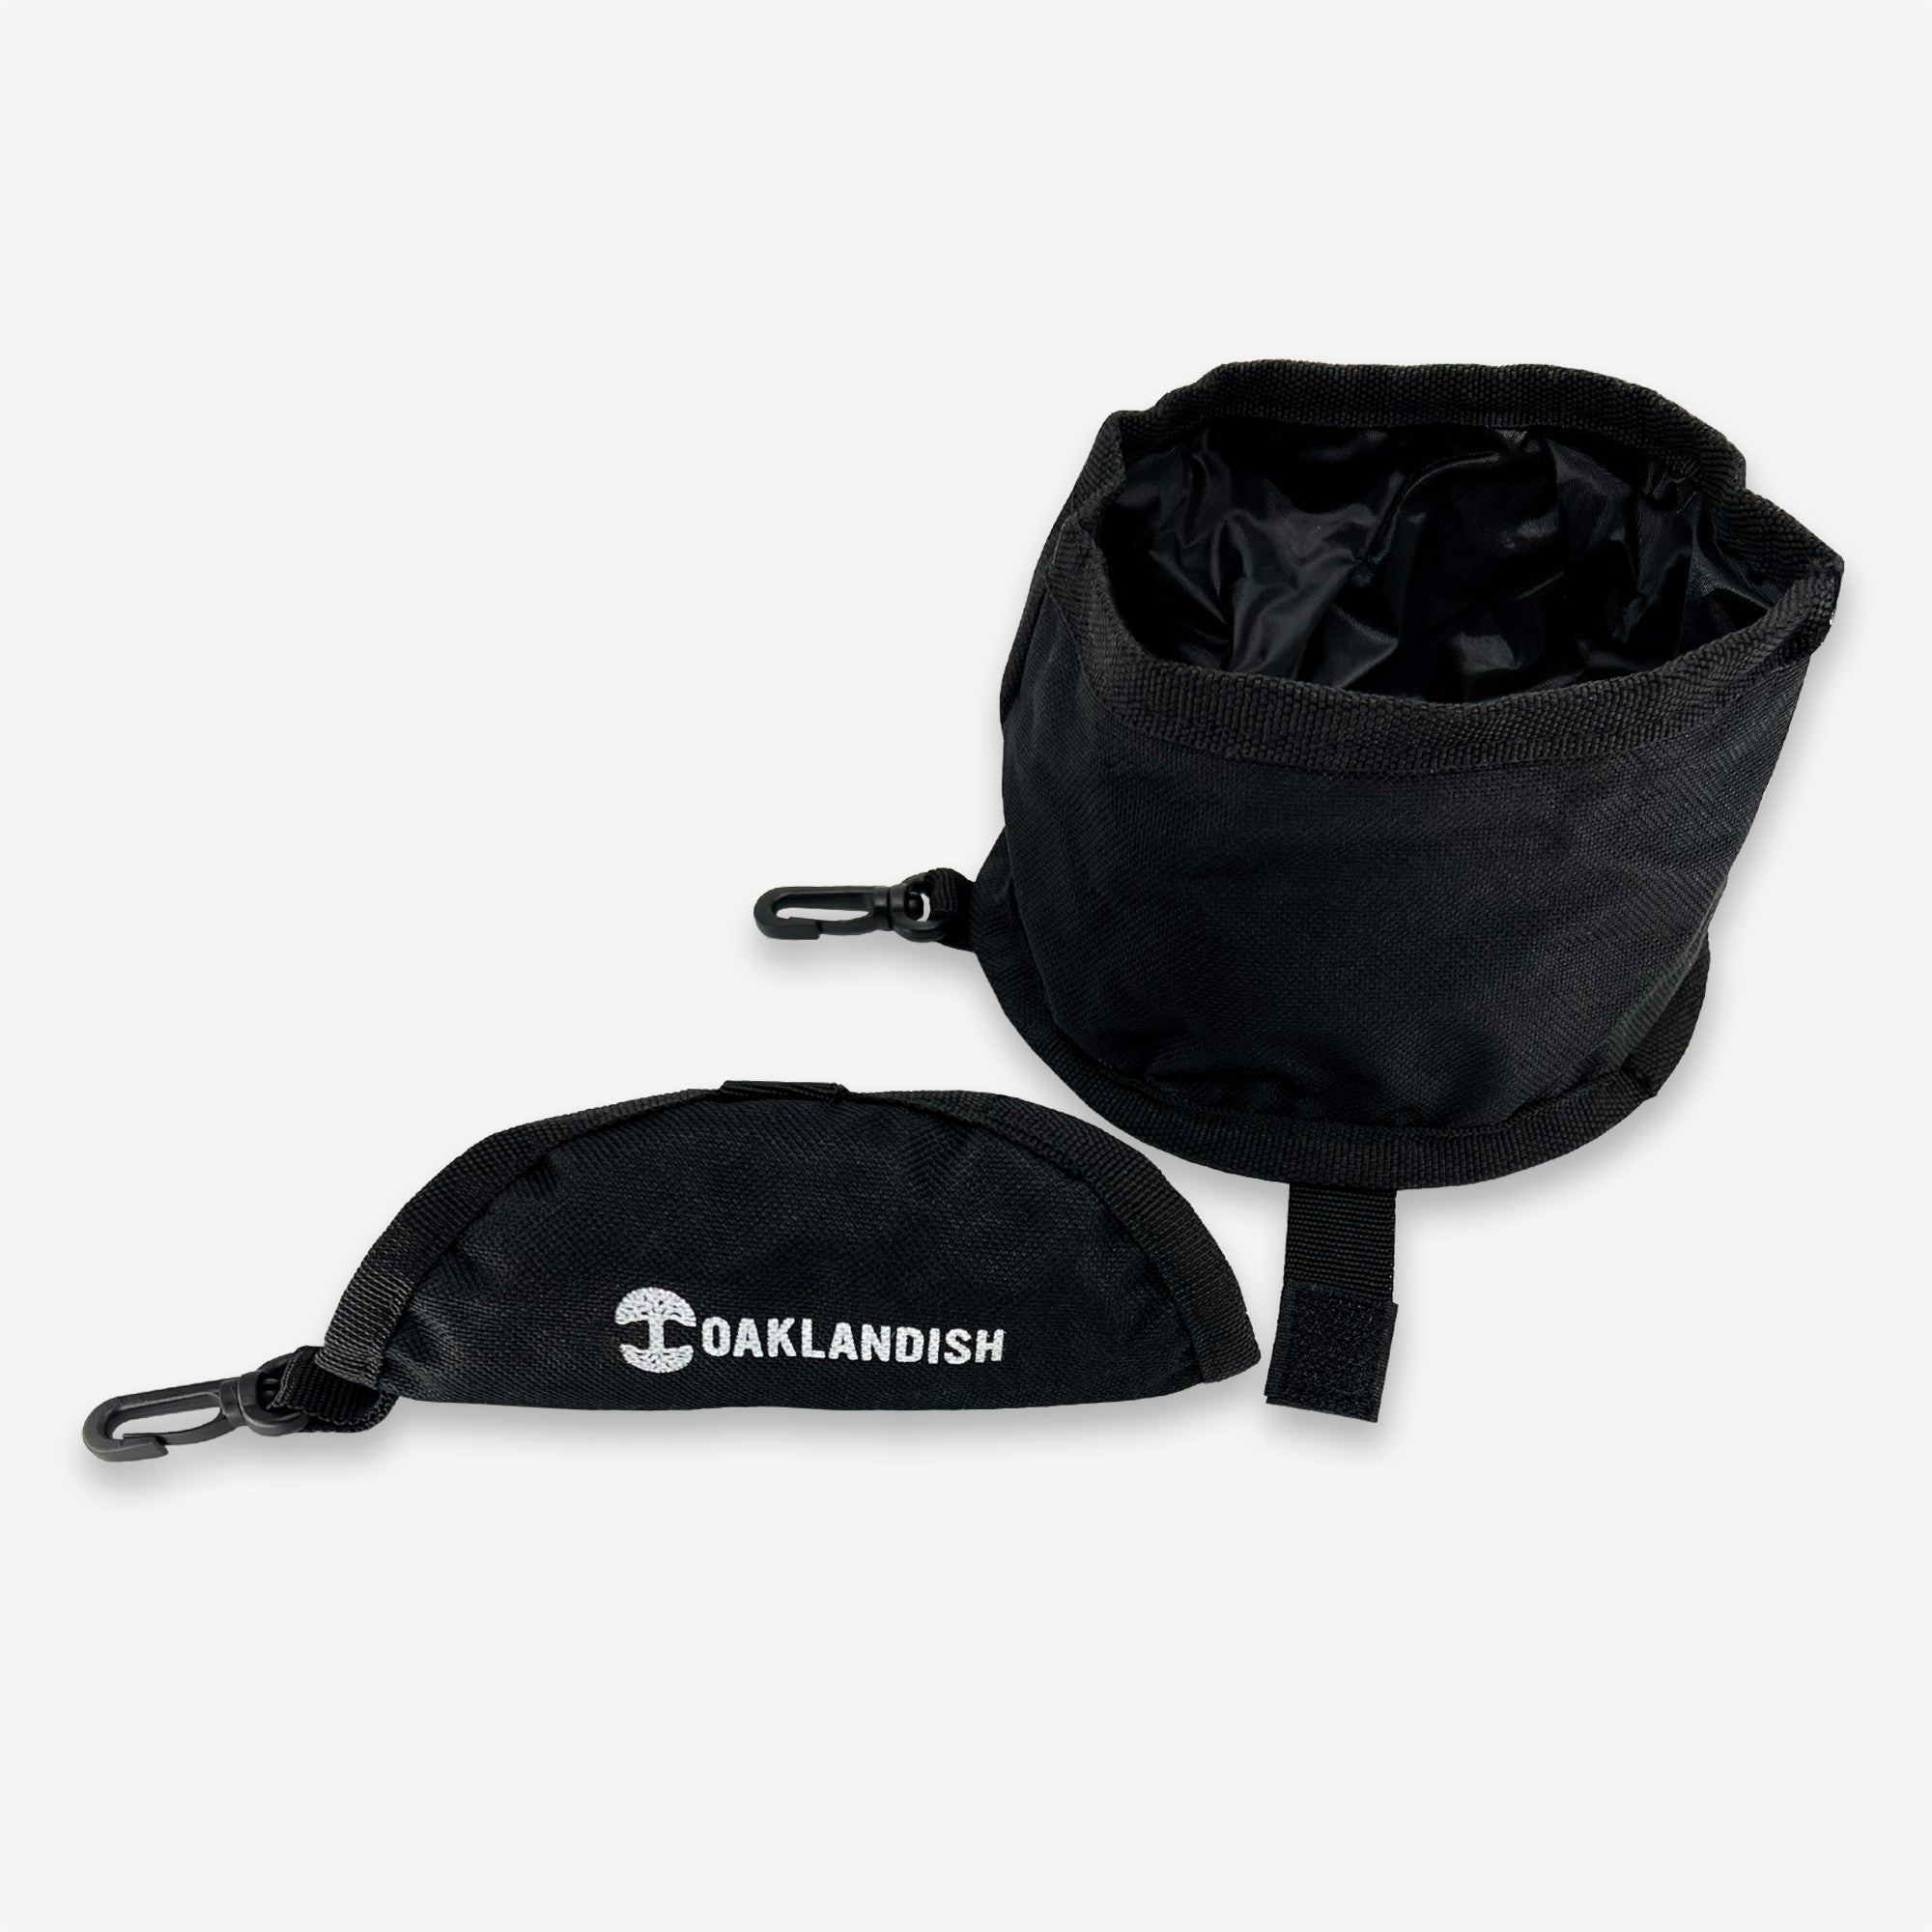 Black collapsable pet travel water bowl with white Oaklandish wordmark and tree logo on the carry bag.